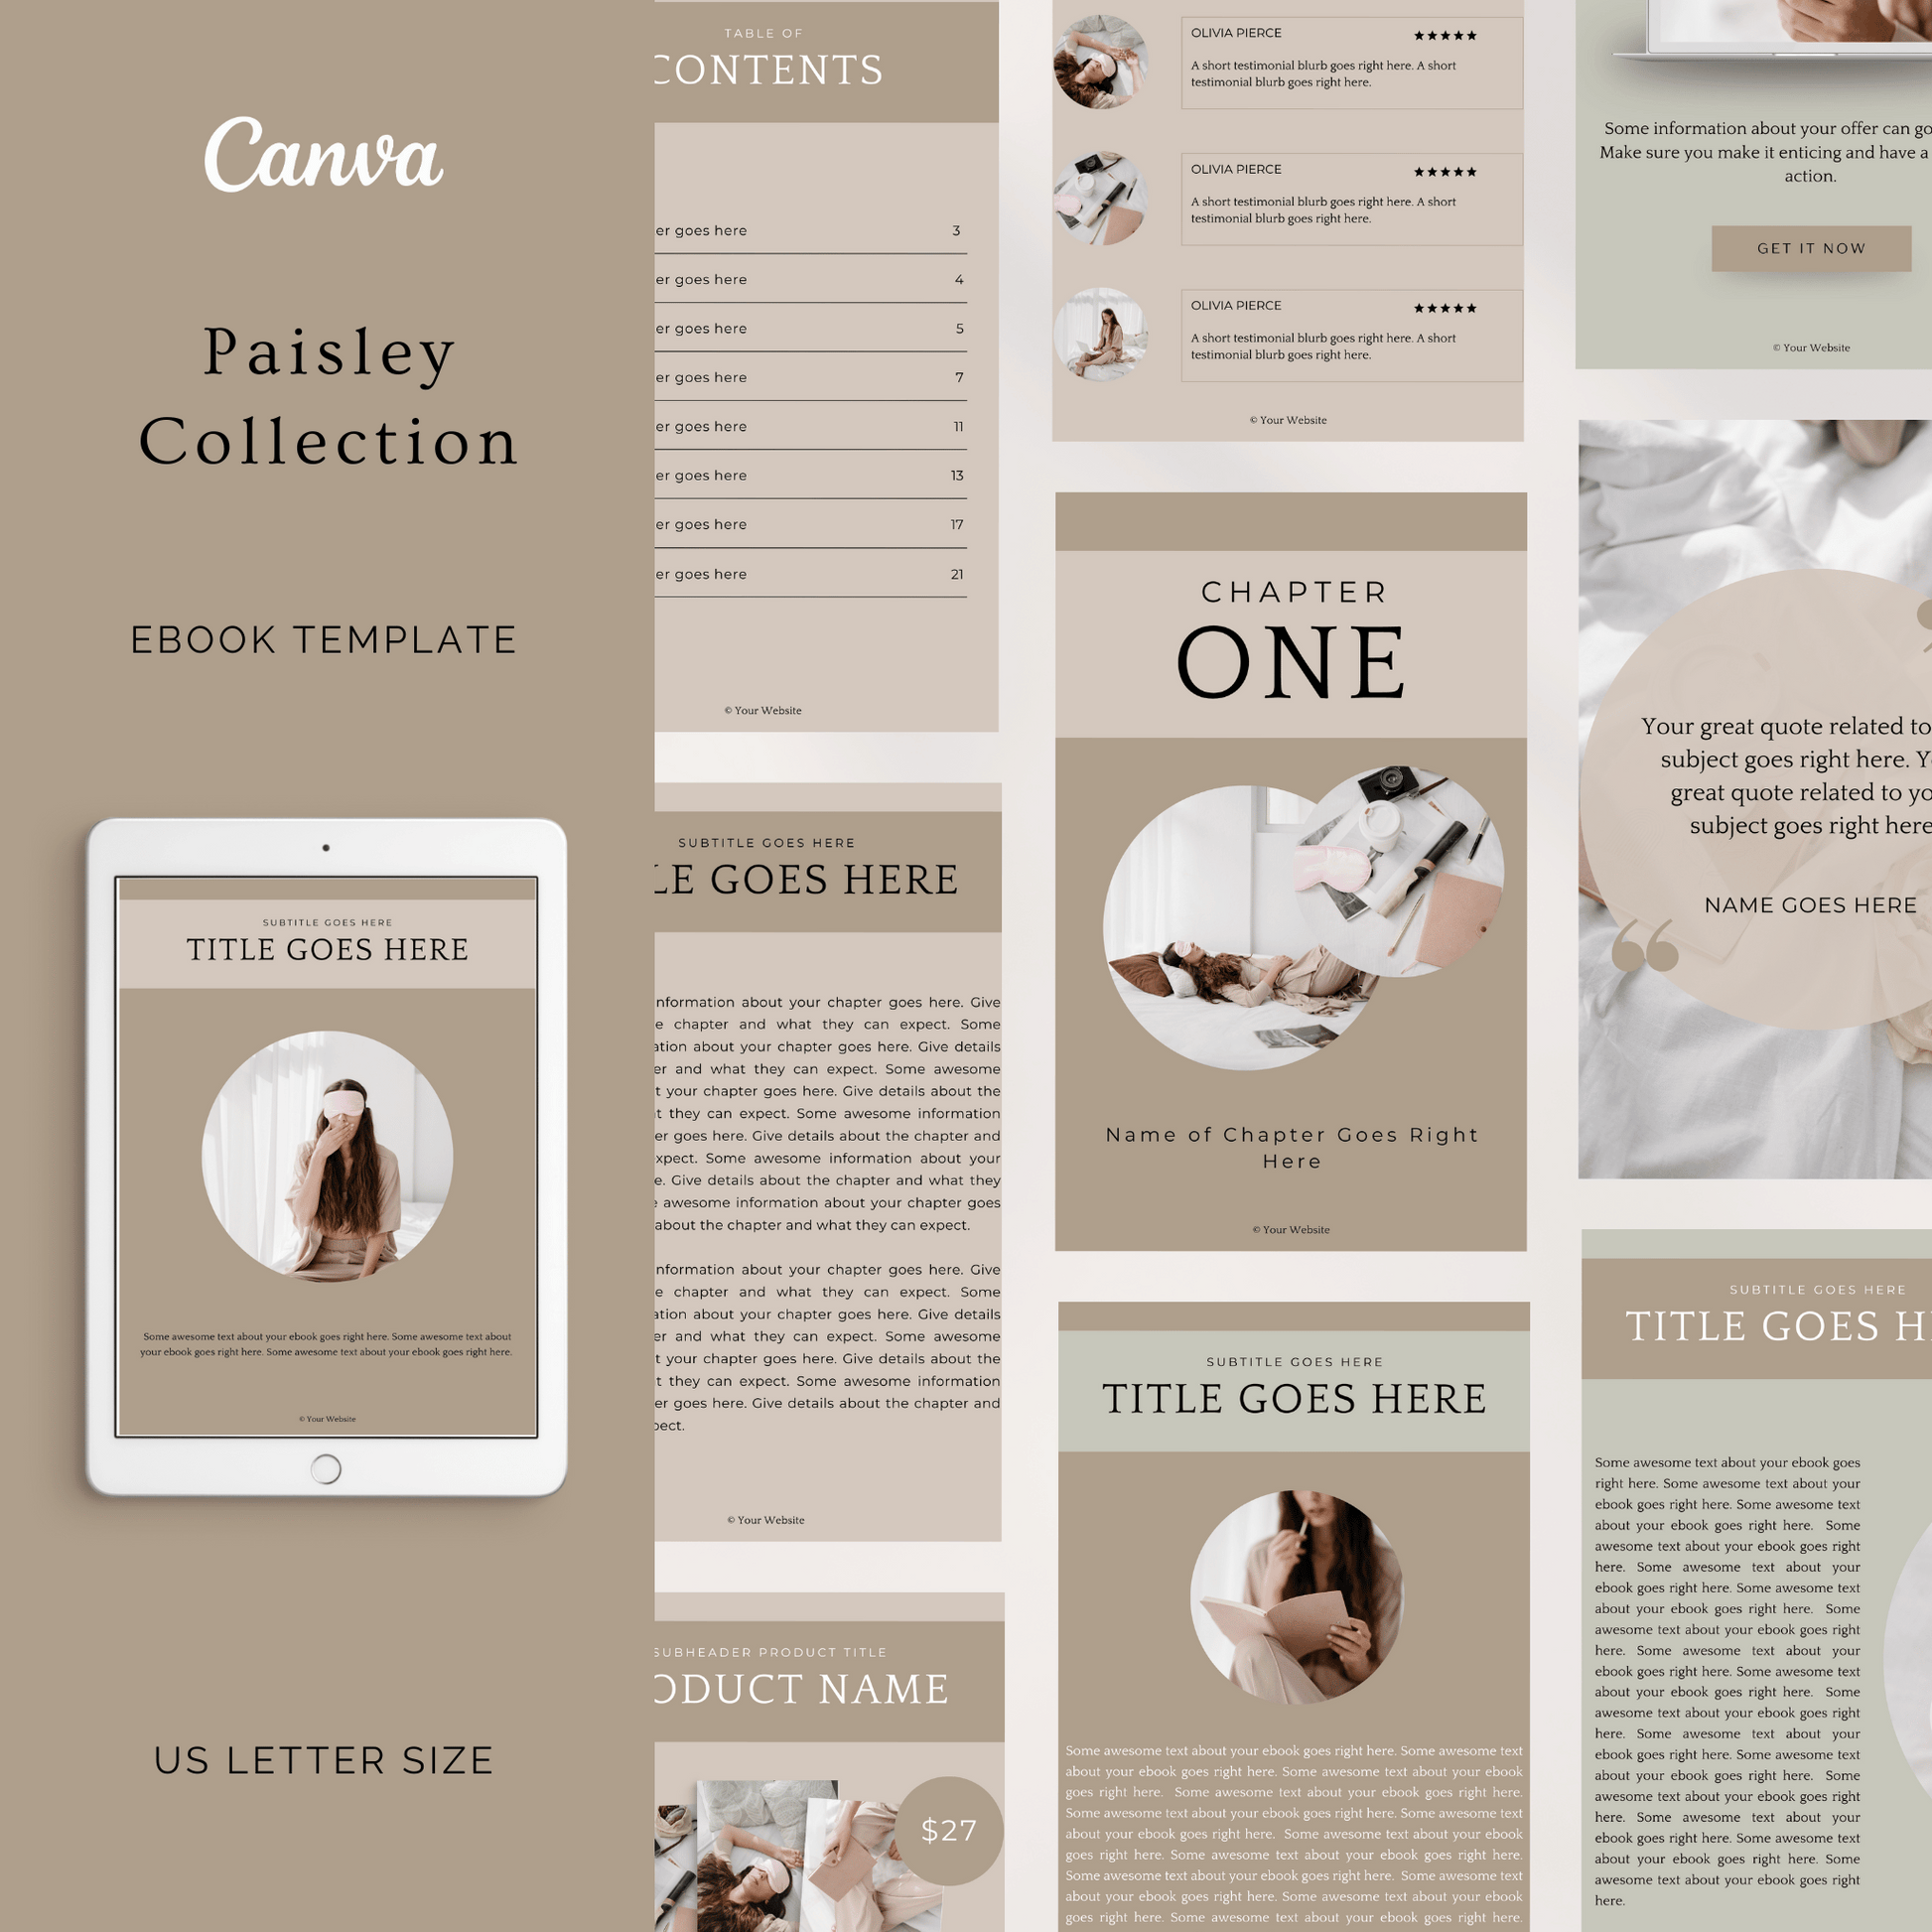 Neutral and earthy Bundle Collection of Canva Templates. Ebook, Workbook, Presentation Slide Deck and Product Mockup Canva templates for female entrepreneurs.